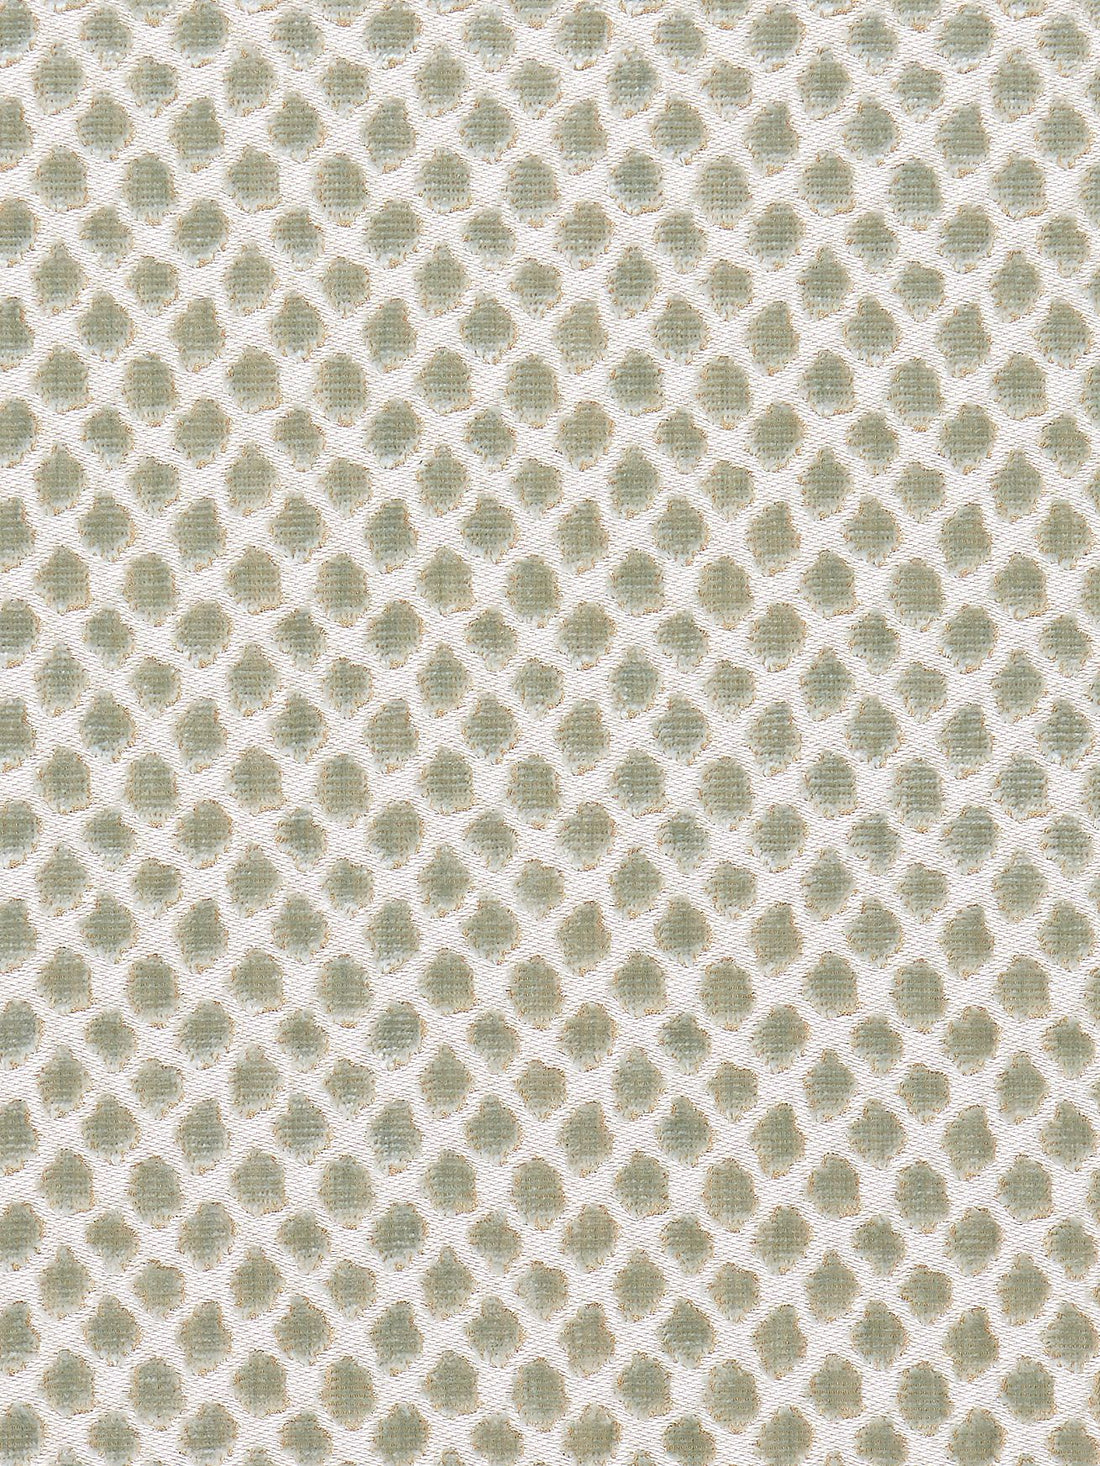 Etosha Velvet fabric in mineral color - pattern number SC 000127022 - by Scalamandre in the Scalamandre Fabrics Book 1 collection